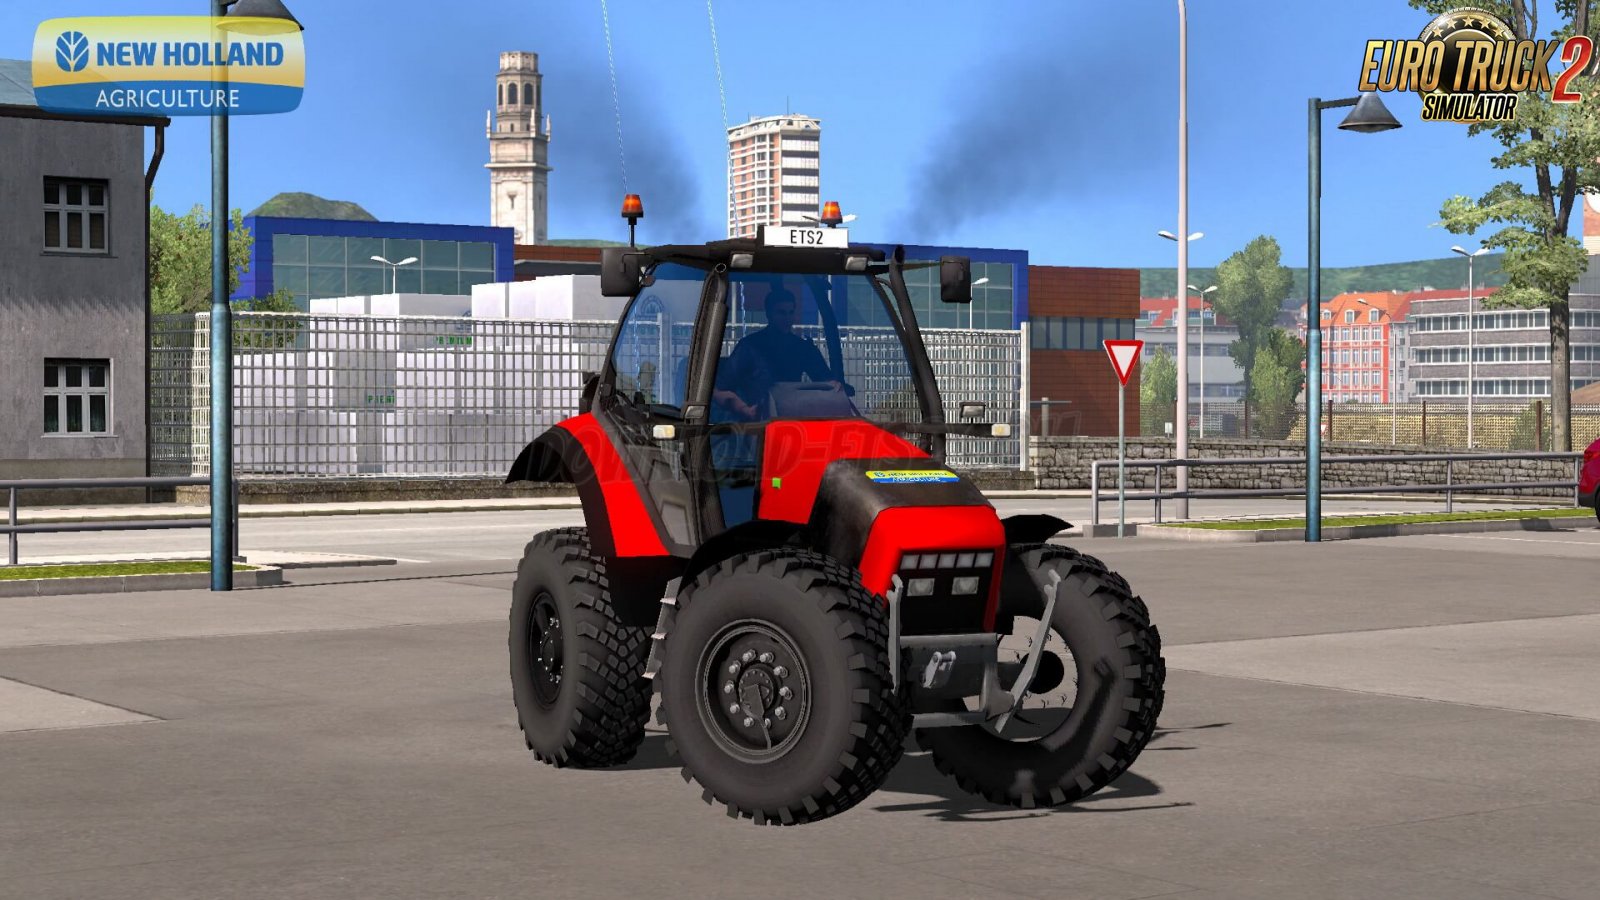 Tractor New Holland v1.0 by Souza SG (1.34.x) for ETS2